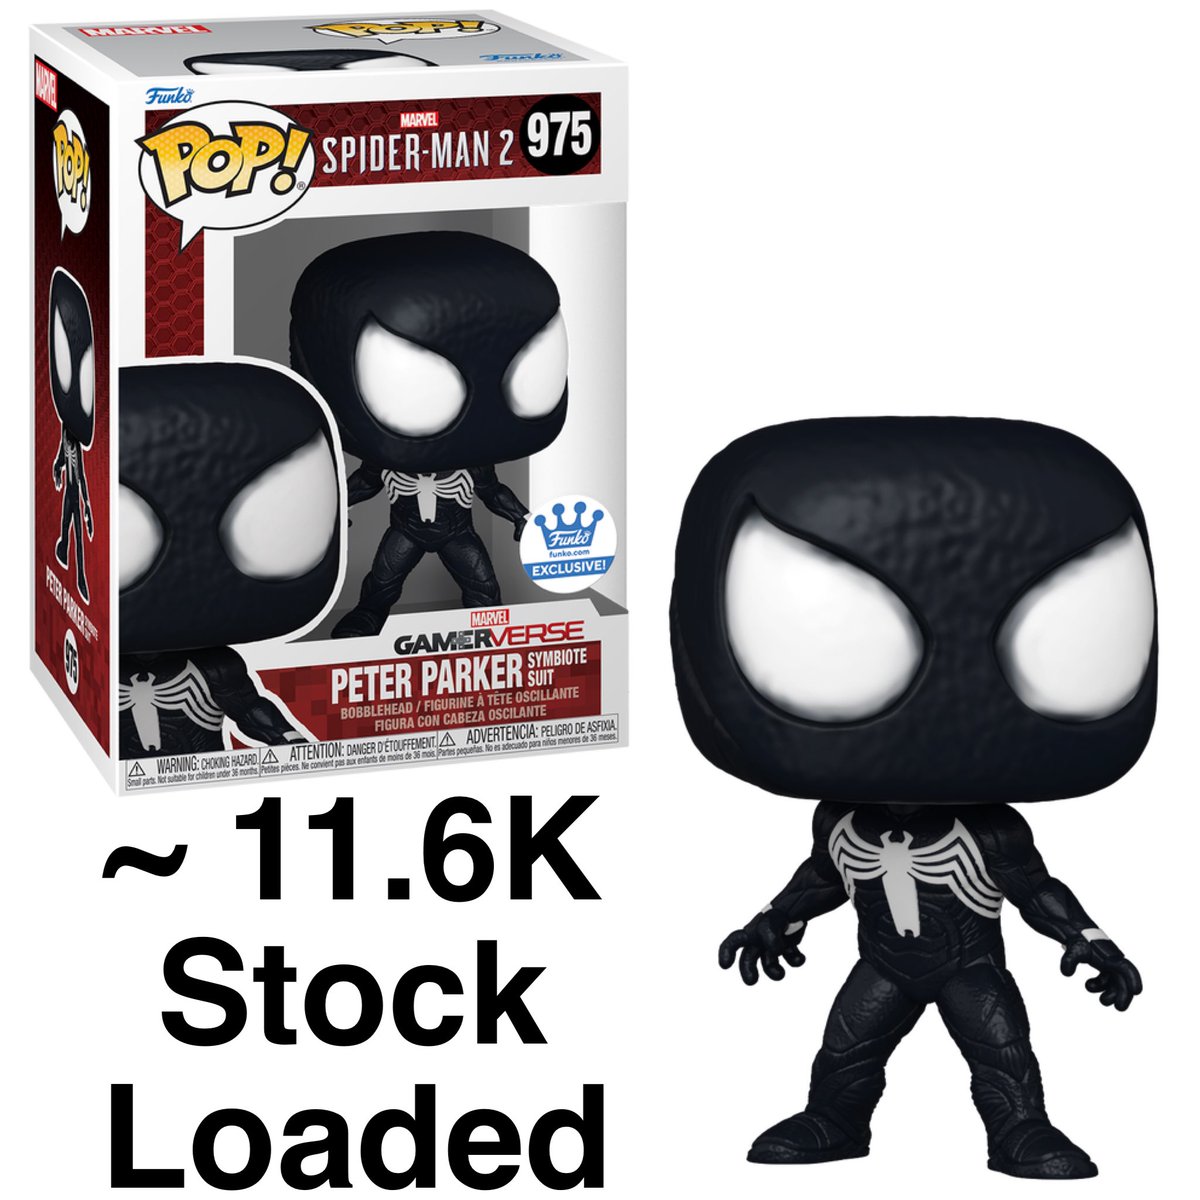 11.6K quantities are loaded for Funko exclusive Peter Parker (Symbiote Suit)! Stock may change. No release date yet. #Ad #SpiderMan #Marvel . distracker.info/3UHyIzO . Credit Soup. #Funko #FunkoPop #FunkoPopVinyl #Pop #PopVinyl #Collectibles #Collectible #FunkoCollector